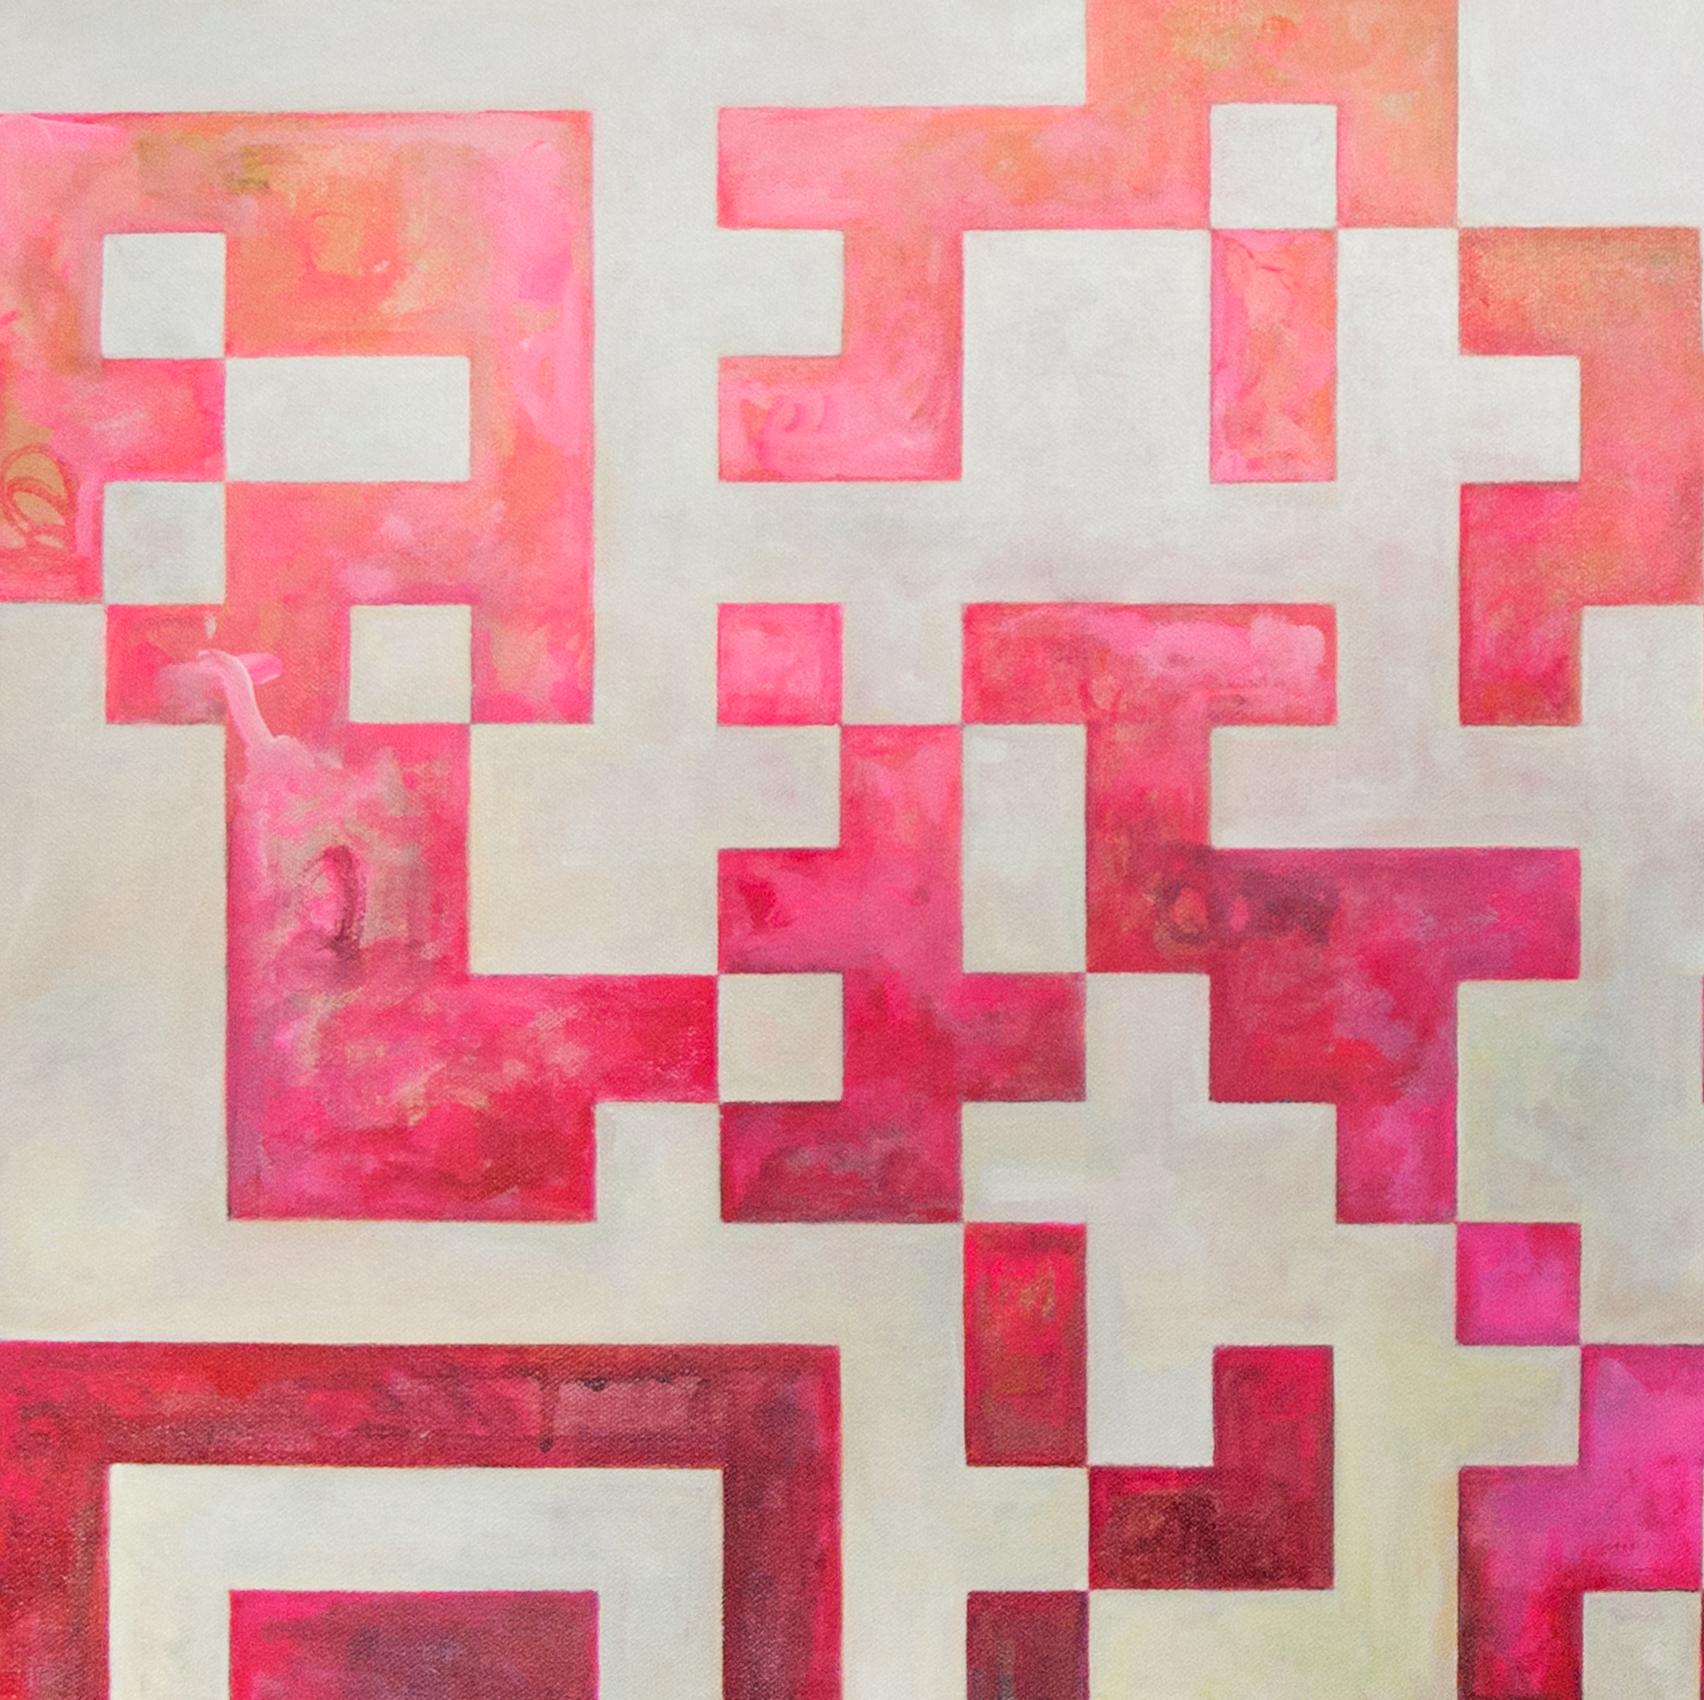 Sandra Cohen’s “agnosticism” is a 30 x 30 x 1 inch abstract acrylic painting on canvas, in hot colors of pinks, reds, and oranges with a variable white background. The hard edged geometric squares that make up the QR code signifying “unconditional